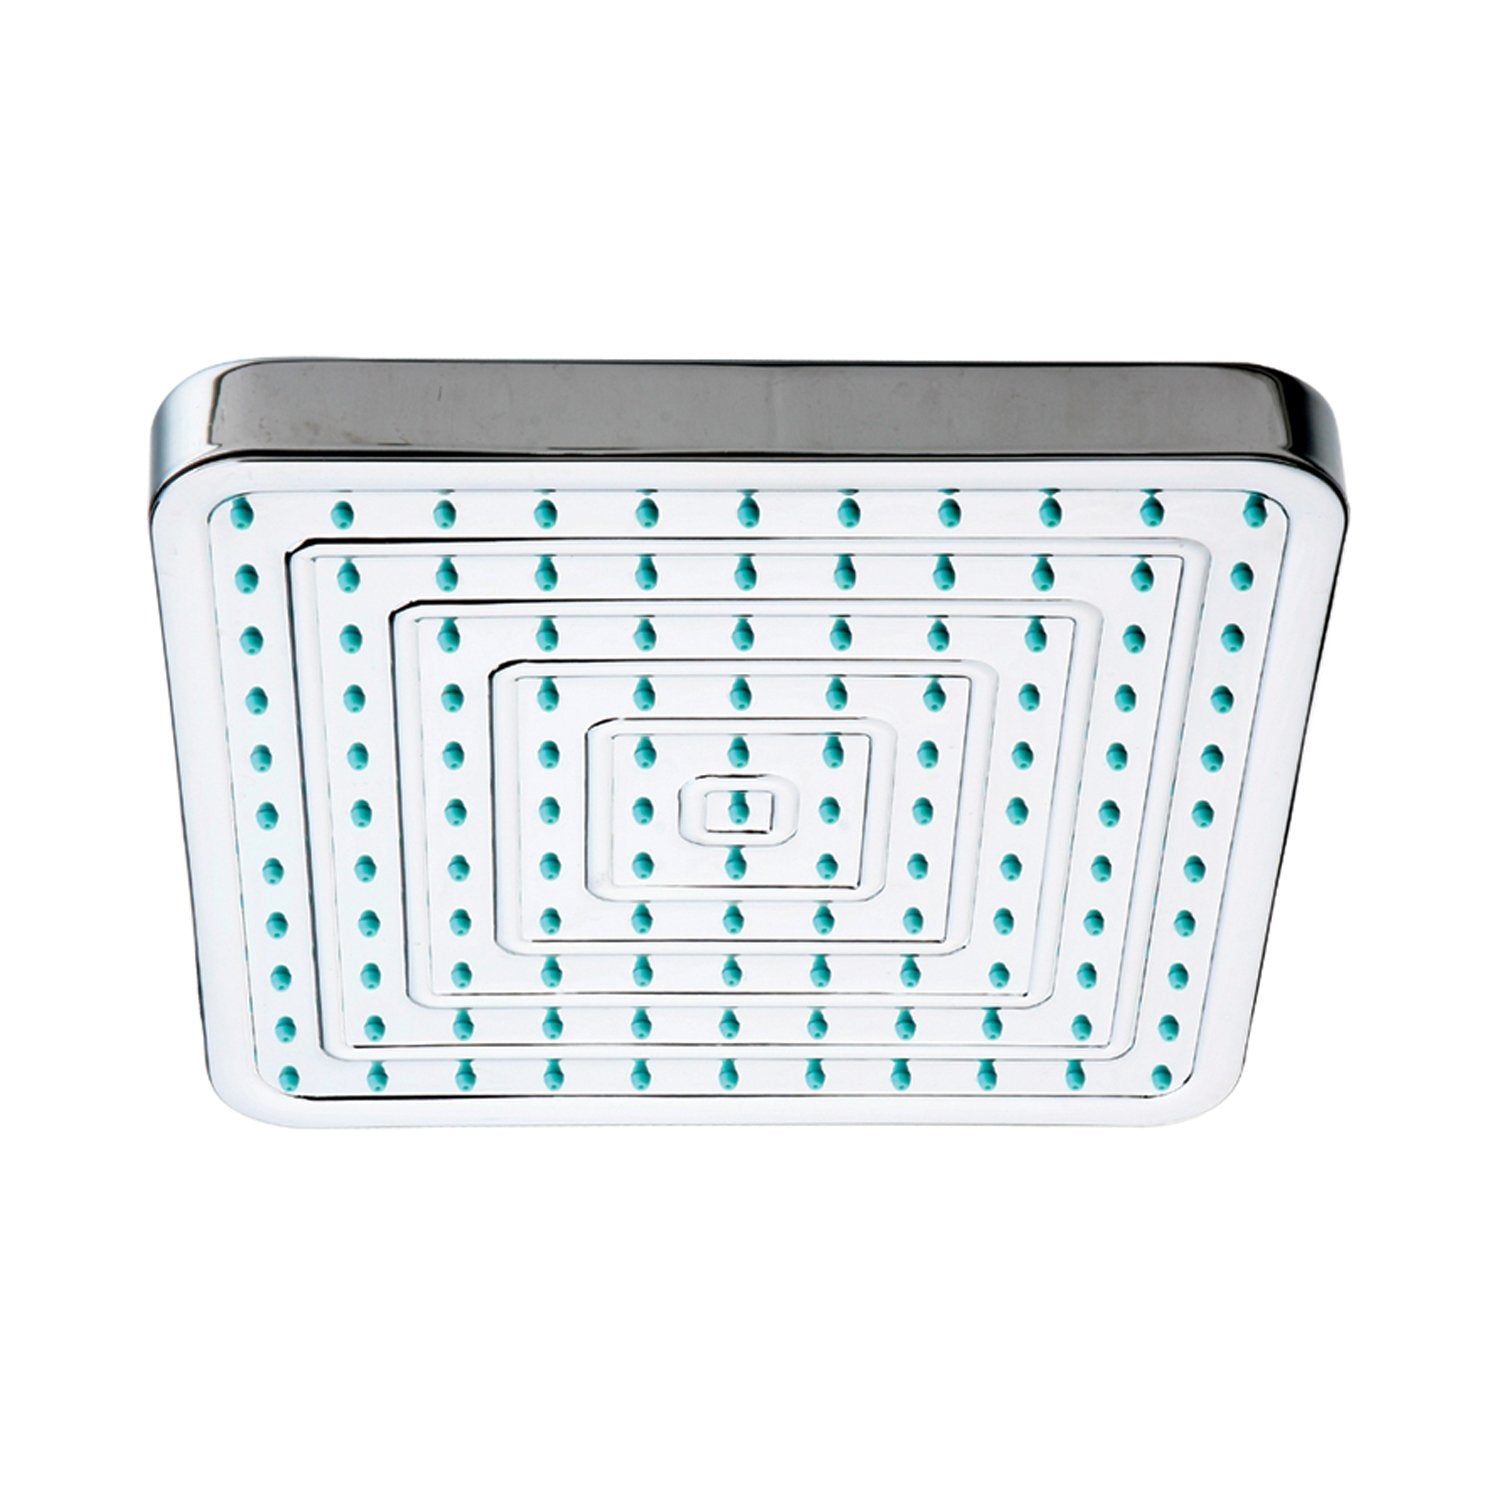 Square Rainfall Showerhead with Decorative Face and Rubber Nozzle Tips